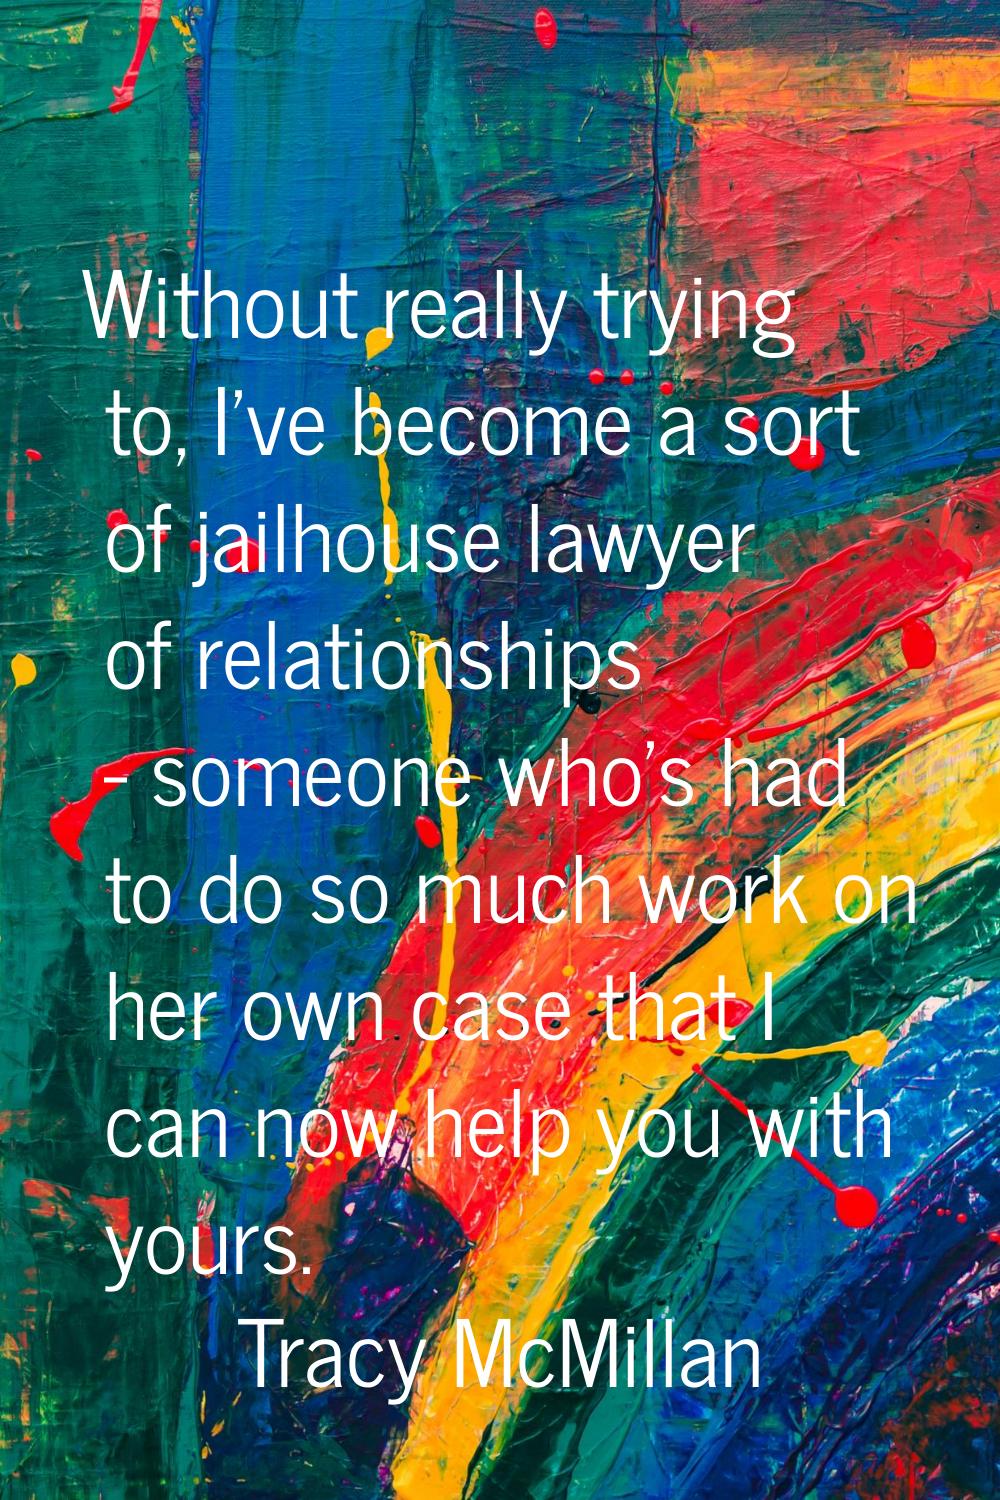 Without really trying to, I've become a sort of jailhouse lawyer of relationships - someone who's h